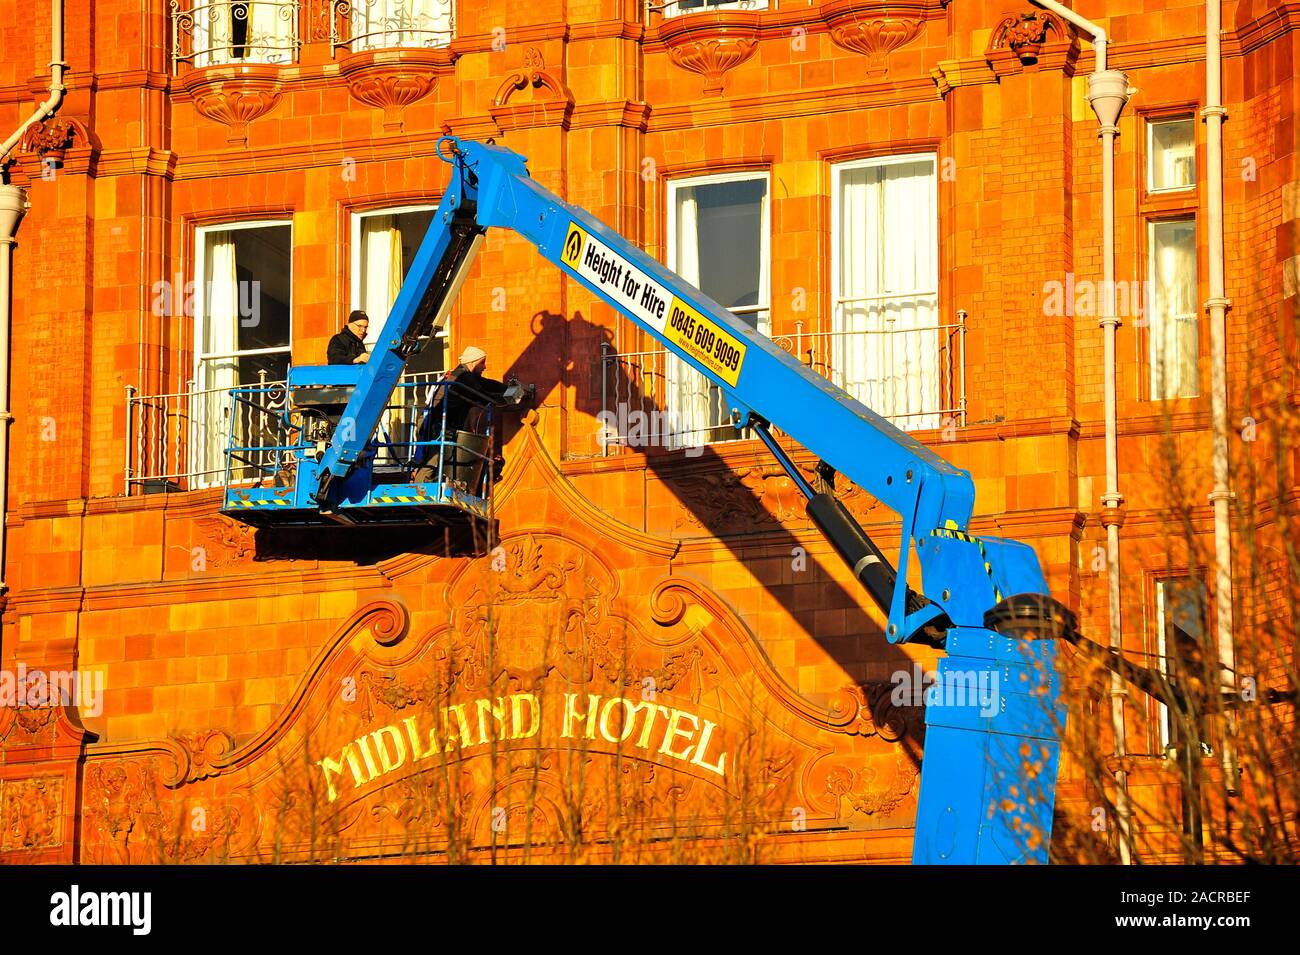 Two men on a hydraulic platform working on the front of the Midland Hotel in bright late afternoon winter sunshine,Manchester,UK Stock Photo